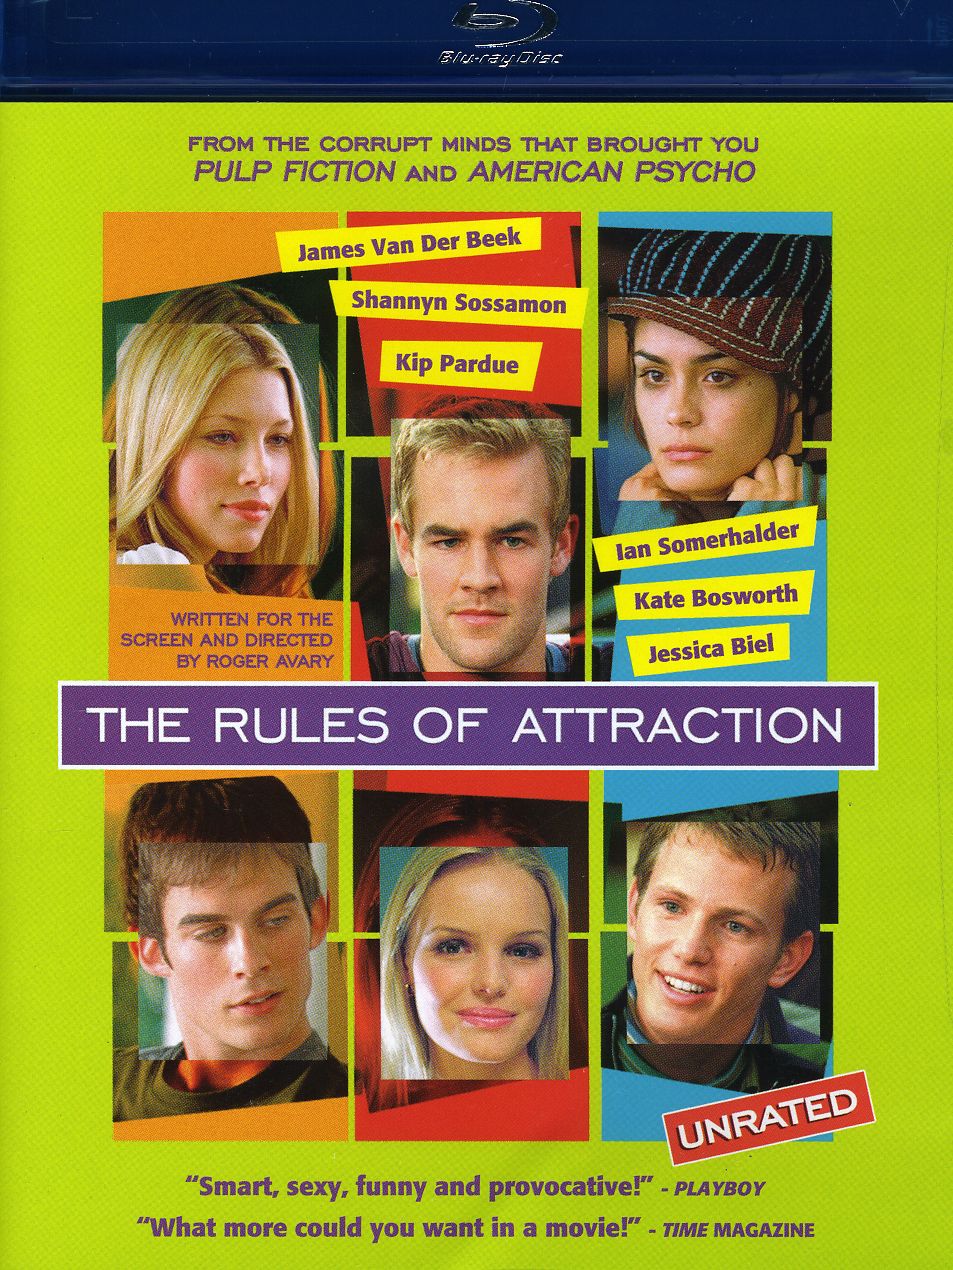 RULES OF ATTRACTION / (AC3 DOL DTS SUB WS)